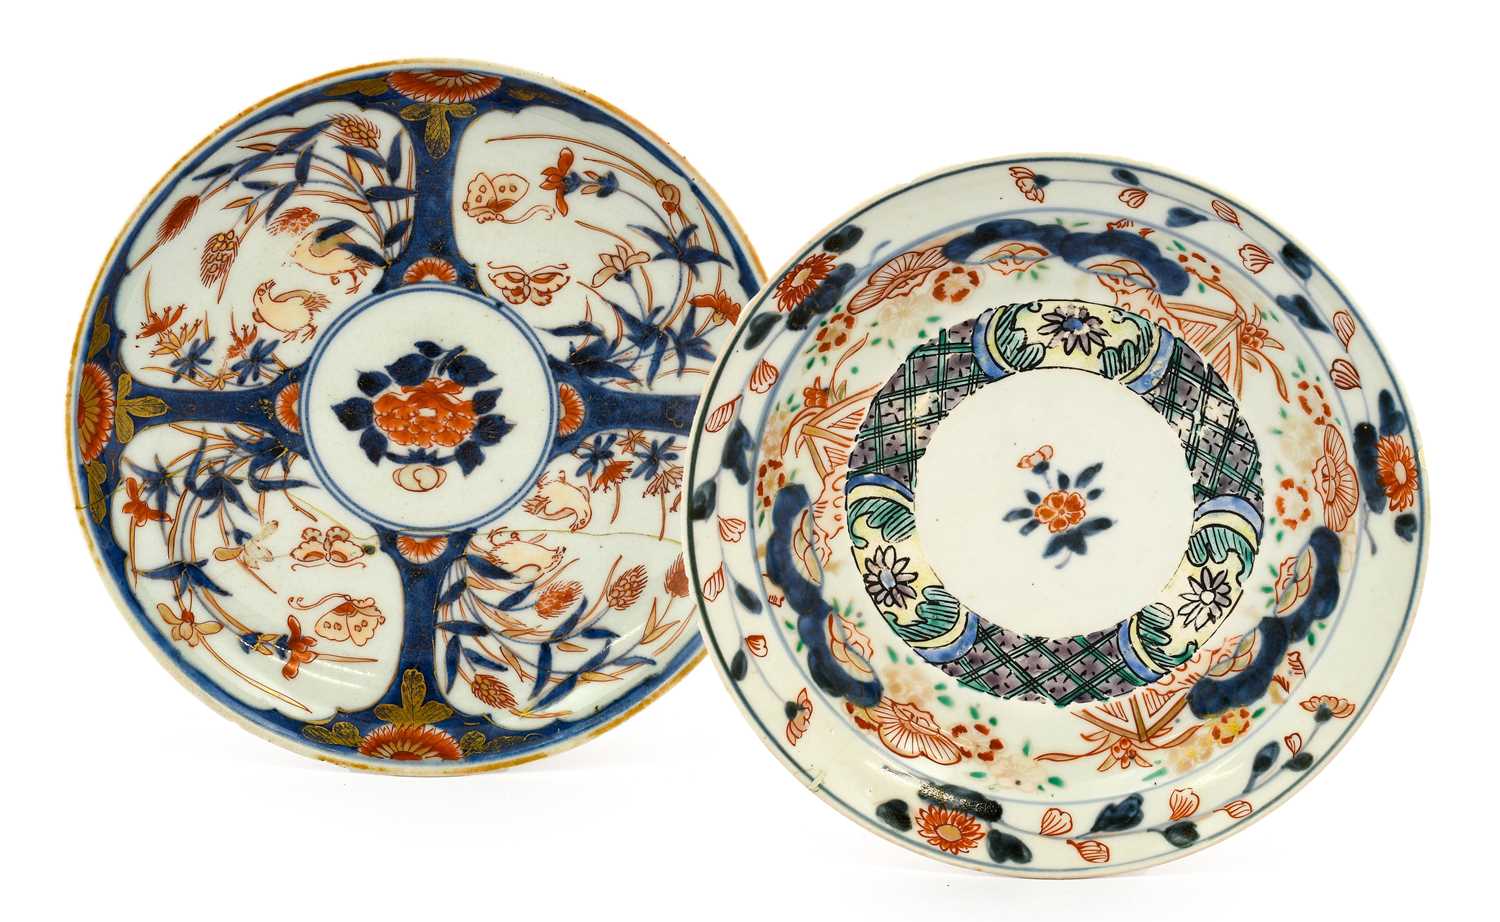 An Imari Porcelain Dish, Edo period, circa 1700, painted with stylised pine, flowers and fences, the